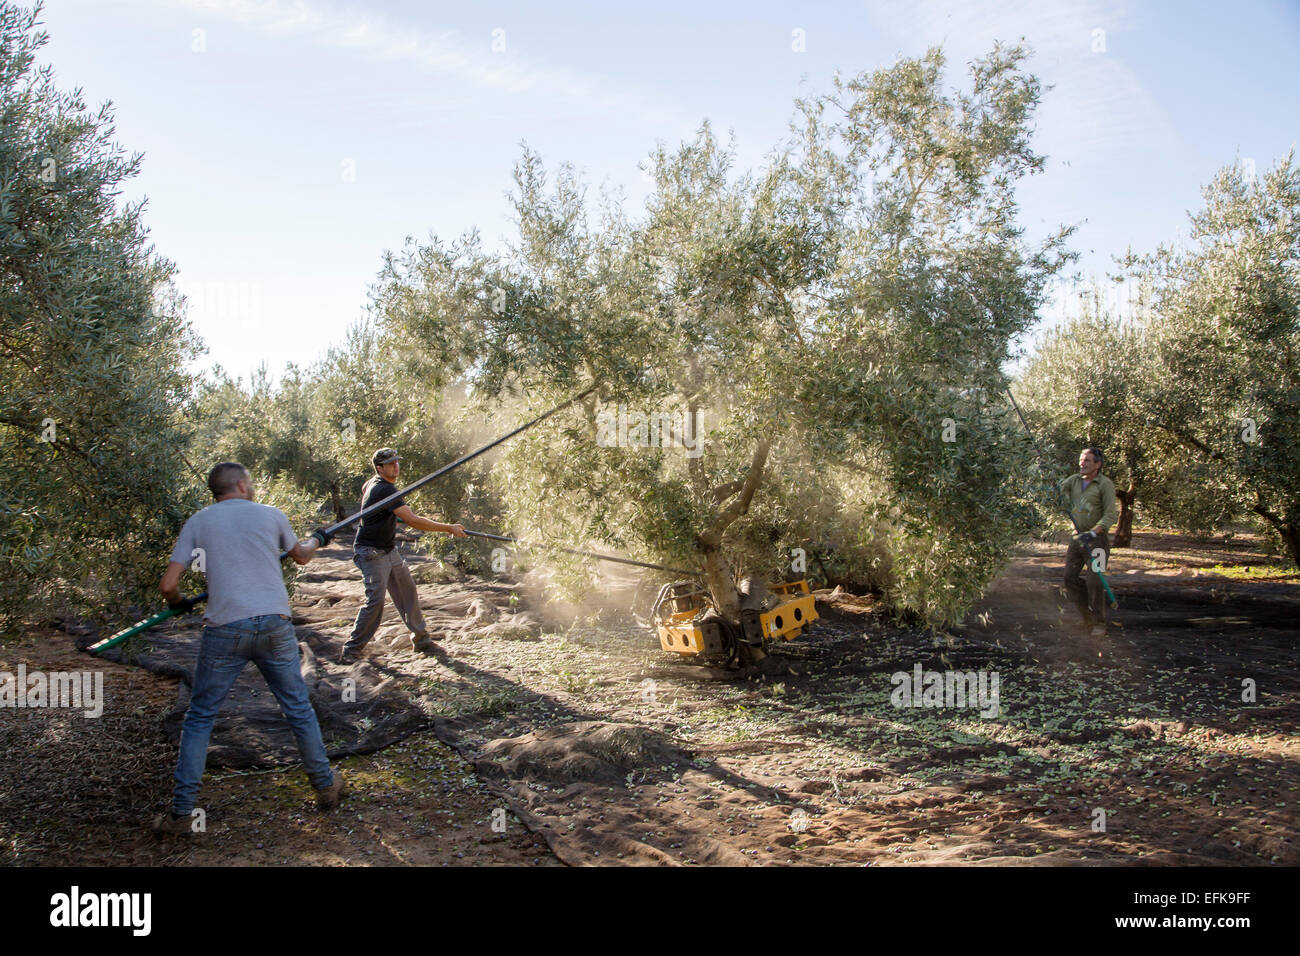 Harvesting olives olive oil Antequera Malaga Andalusia Spain Stock Photo